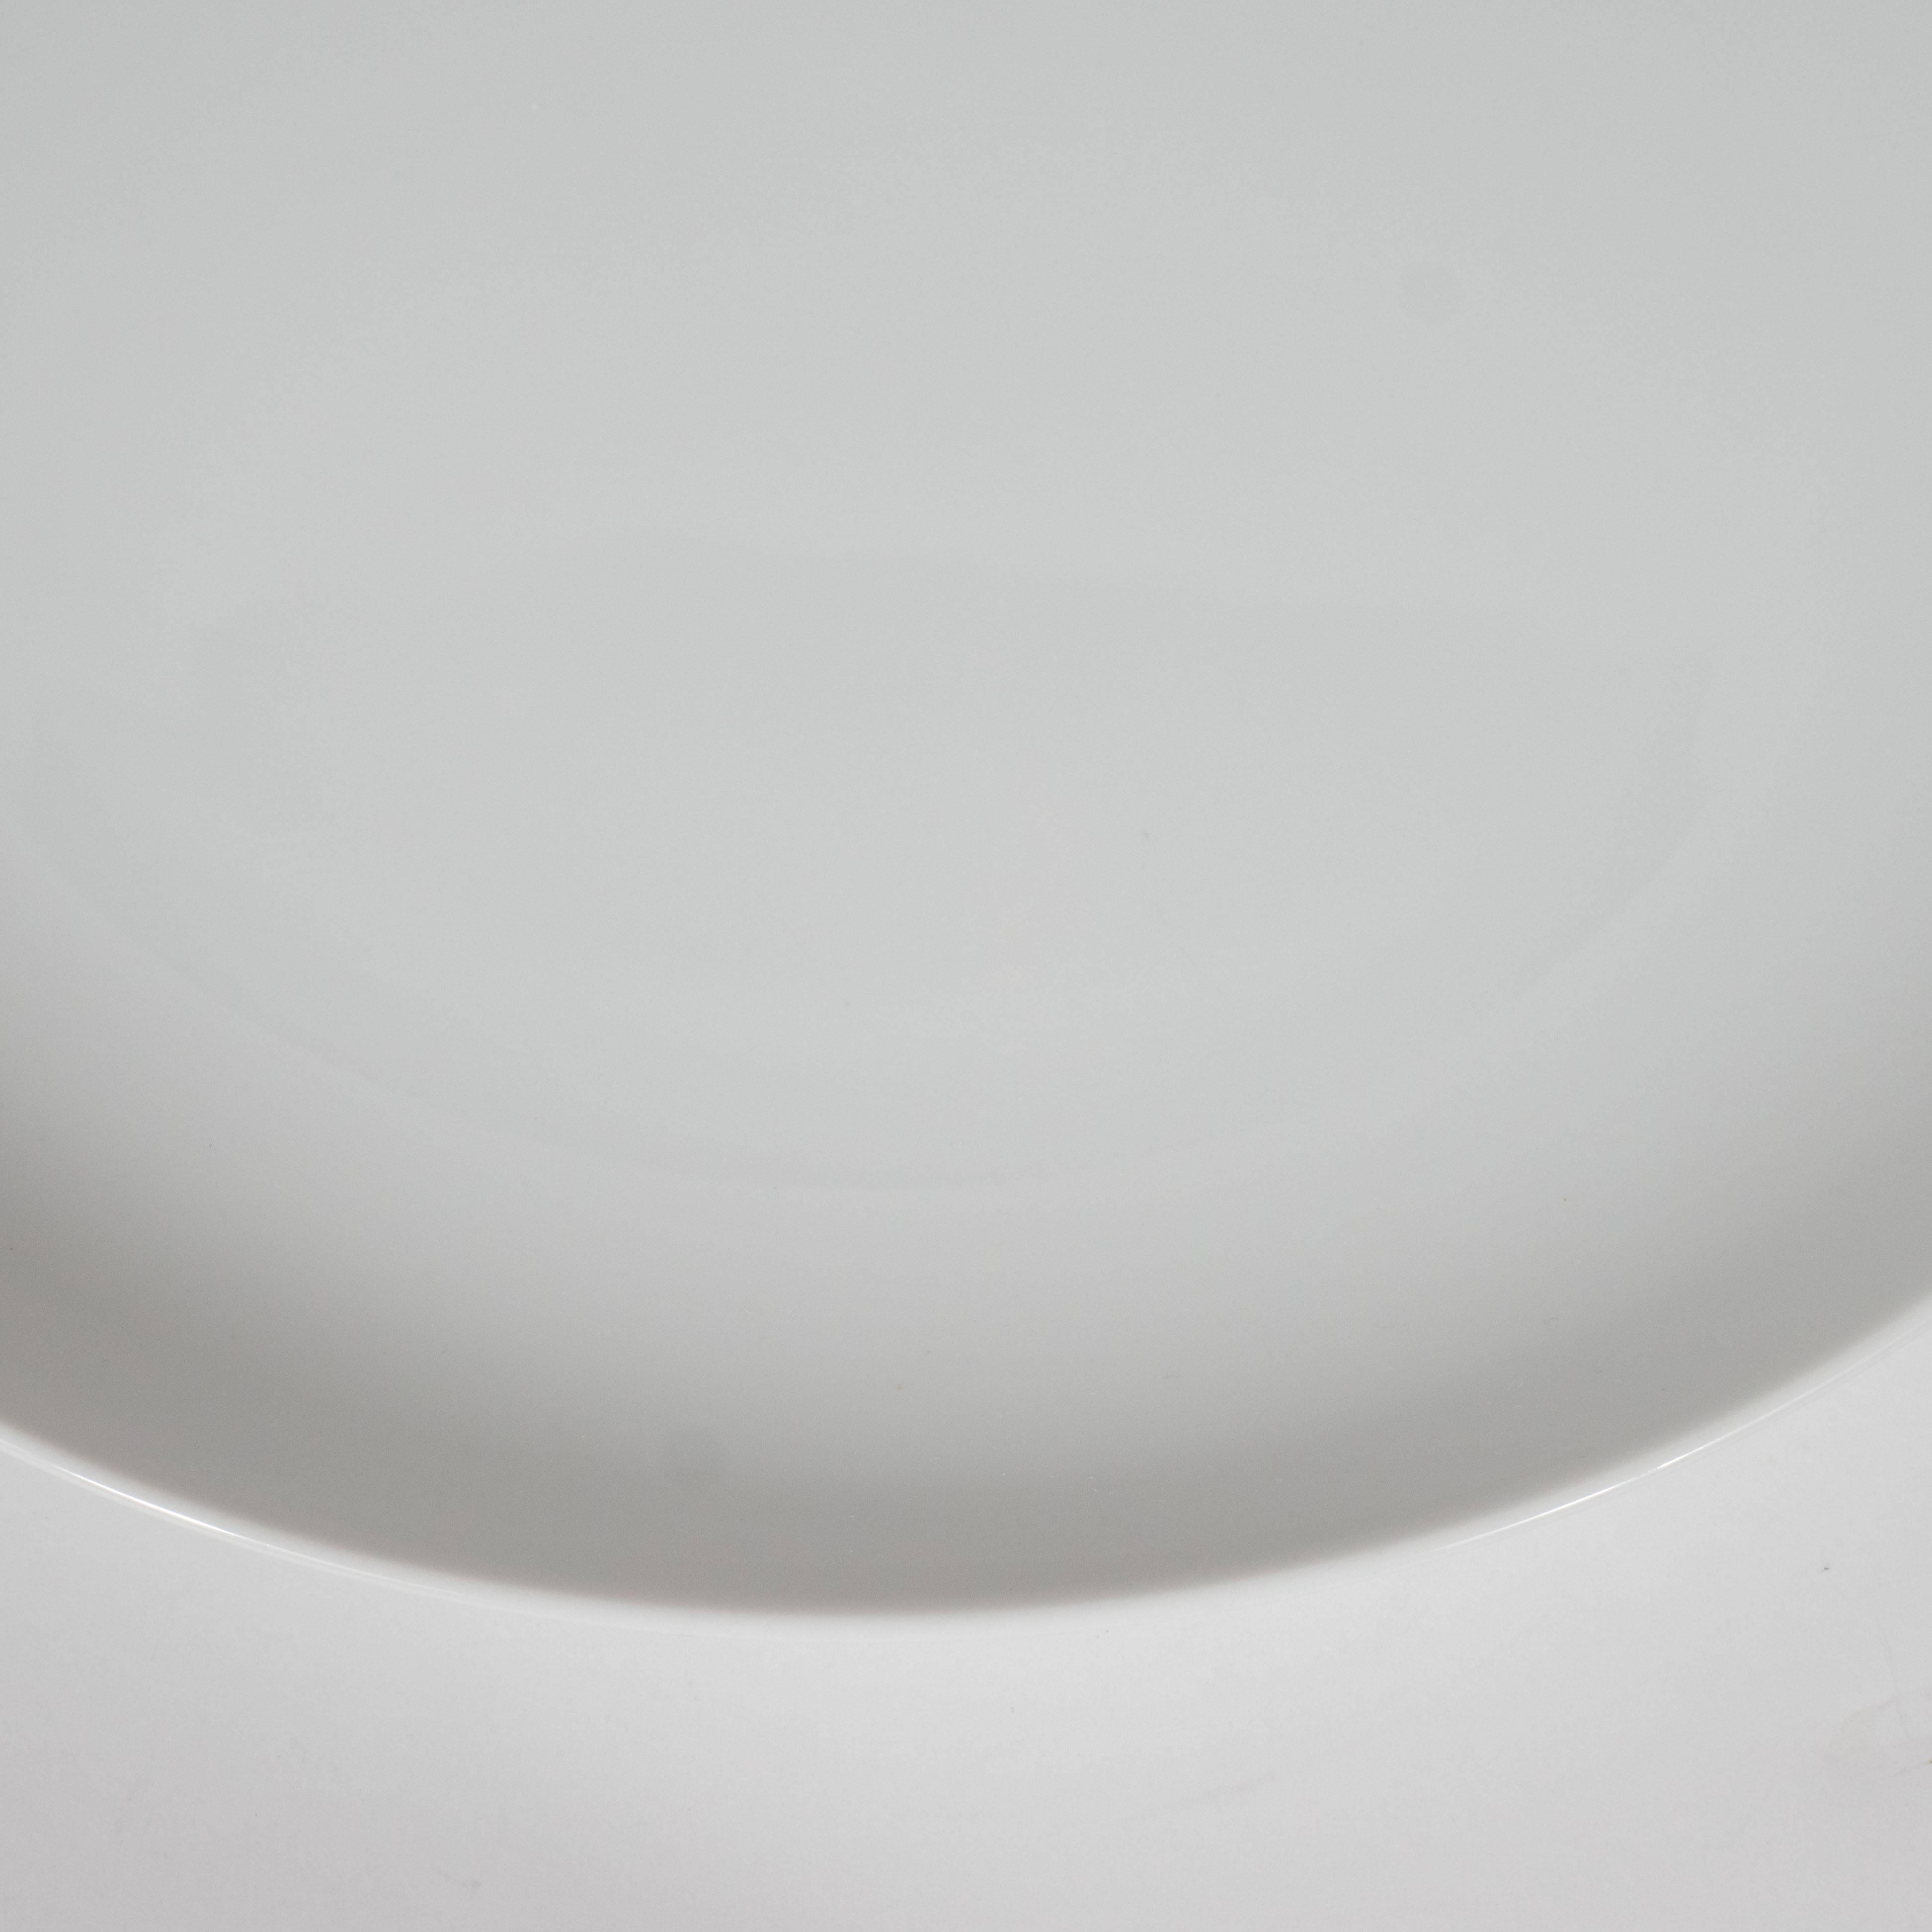 Mid-20th Century Three Mid-Century Modern White Ceramic Serving Plate by Tiffany & Co.